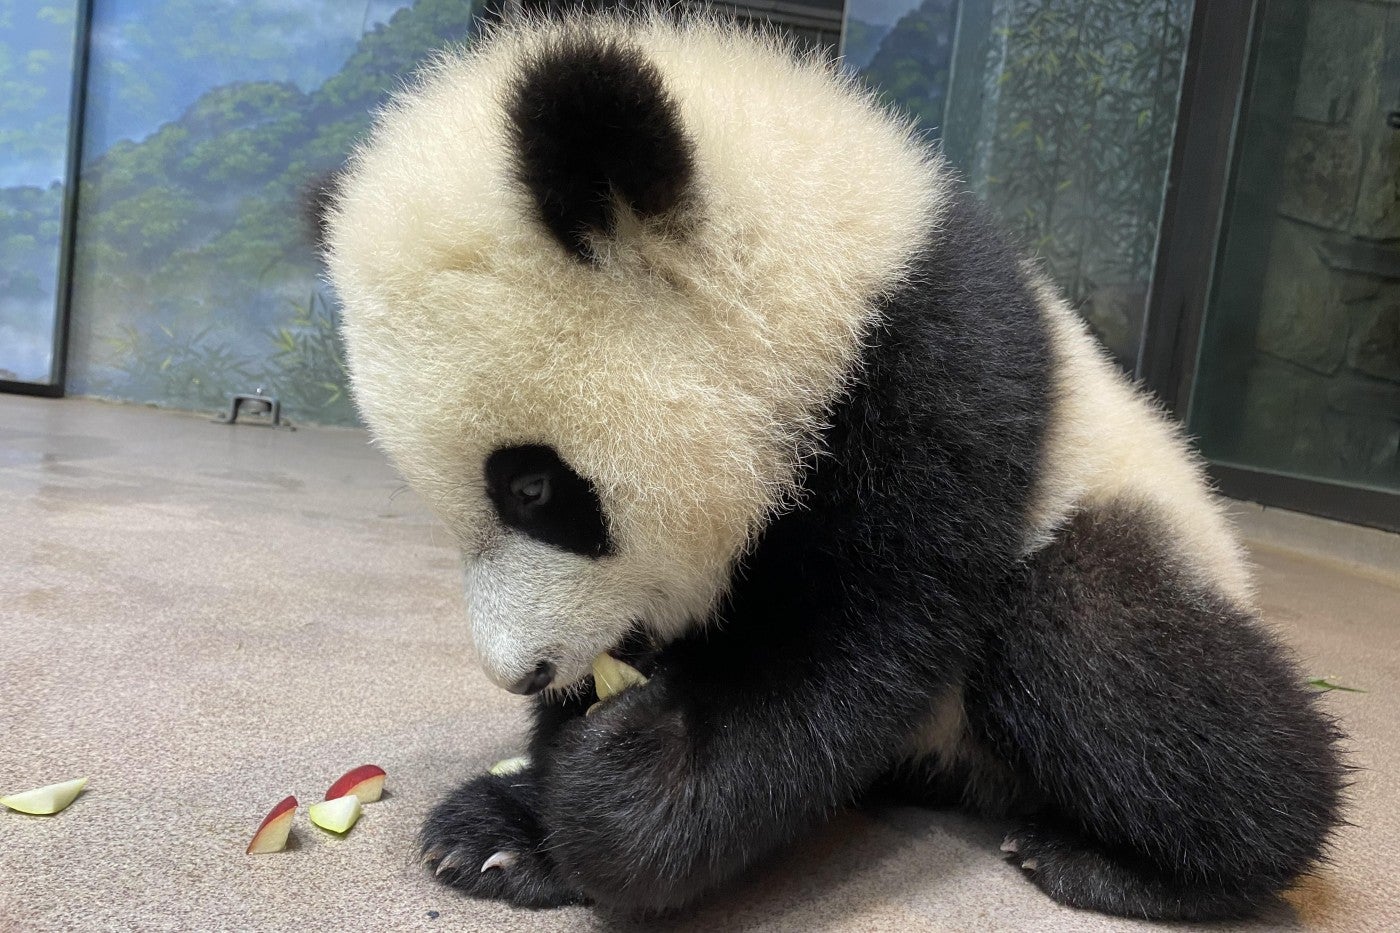 On March 22, giant panda cub Xiao Qi Ji had his first taste of apples and pears!